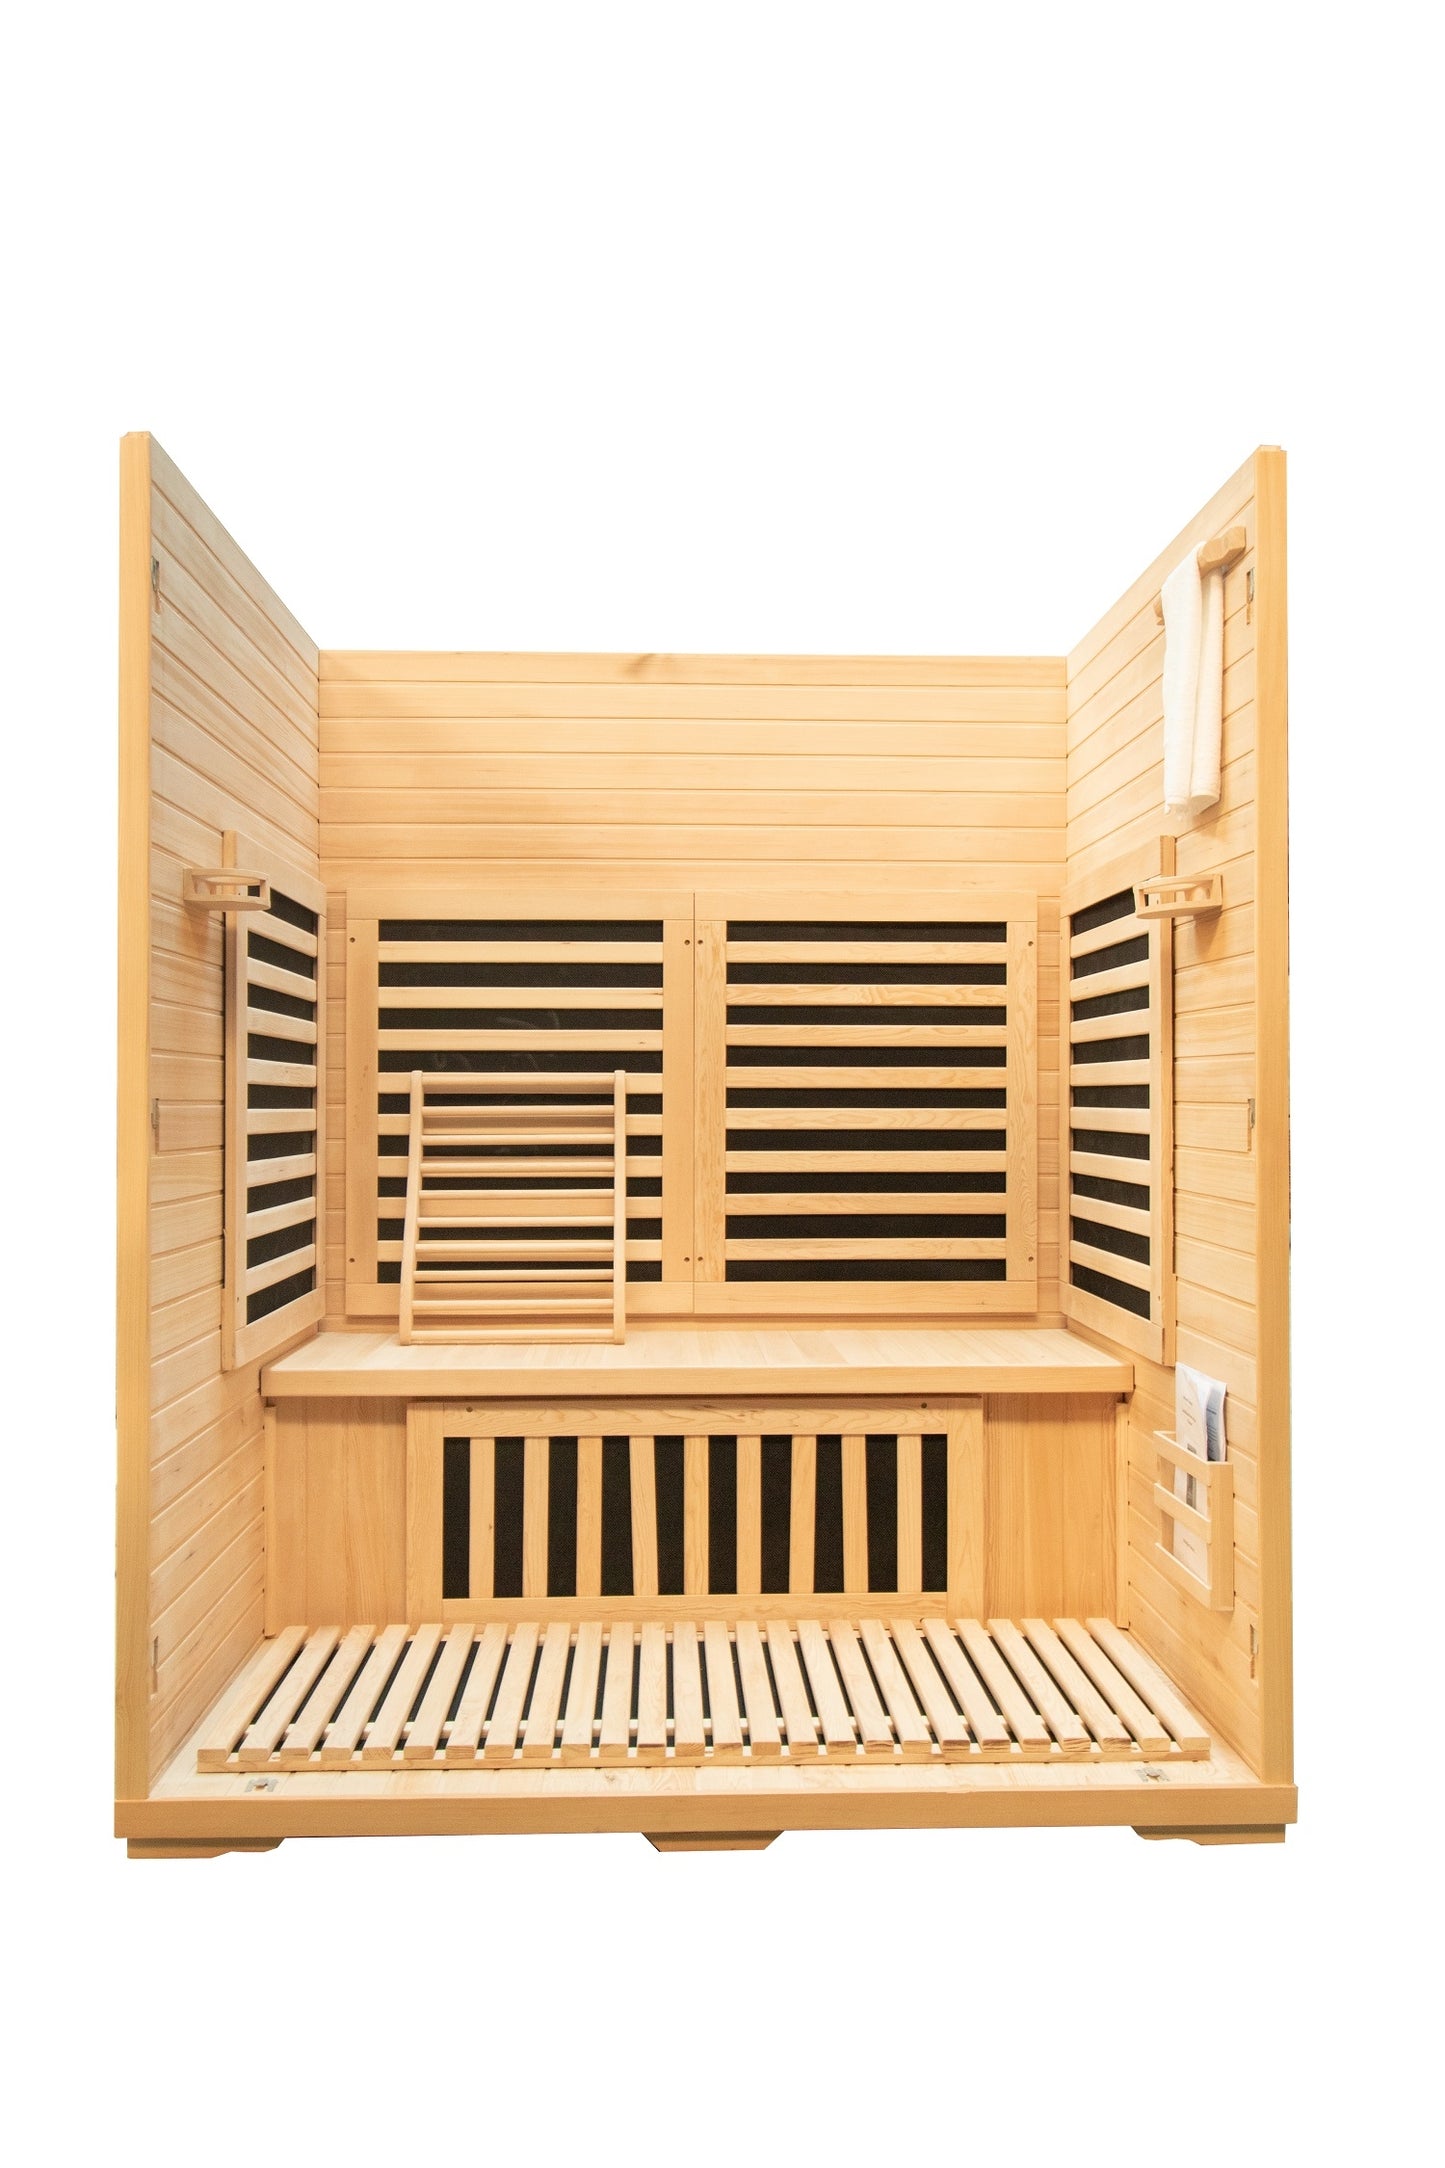 3 Person Luxury Carbon Fibre Infrared Sauna 8 Heating Panels 003F